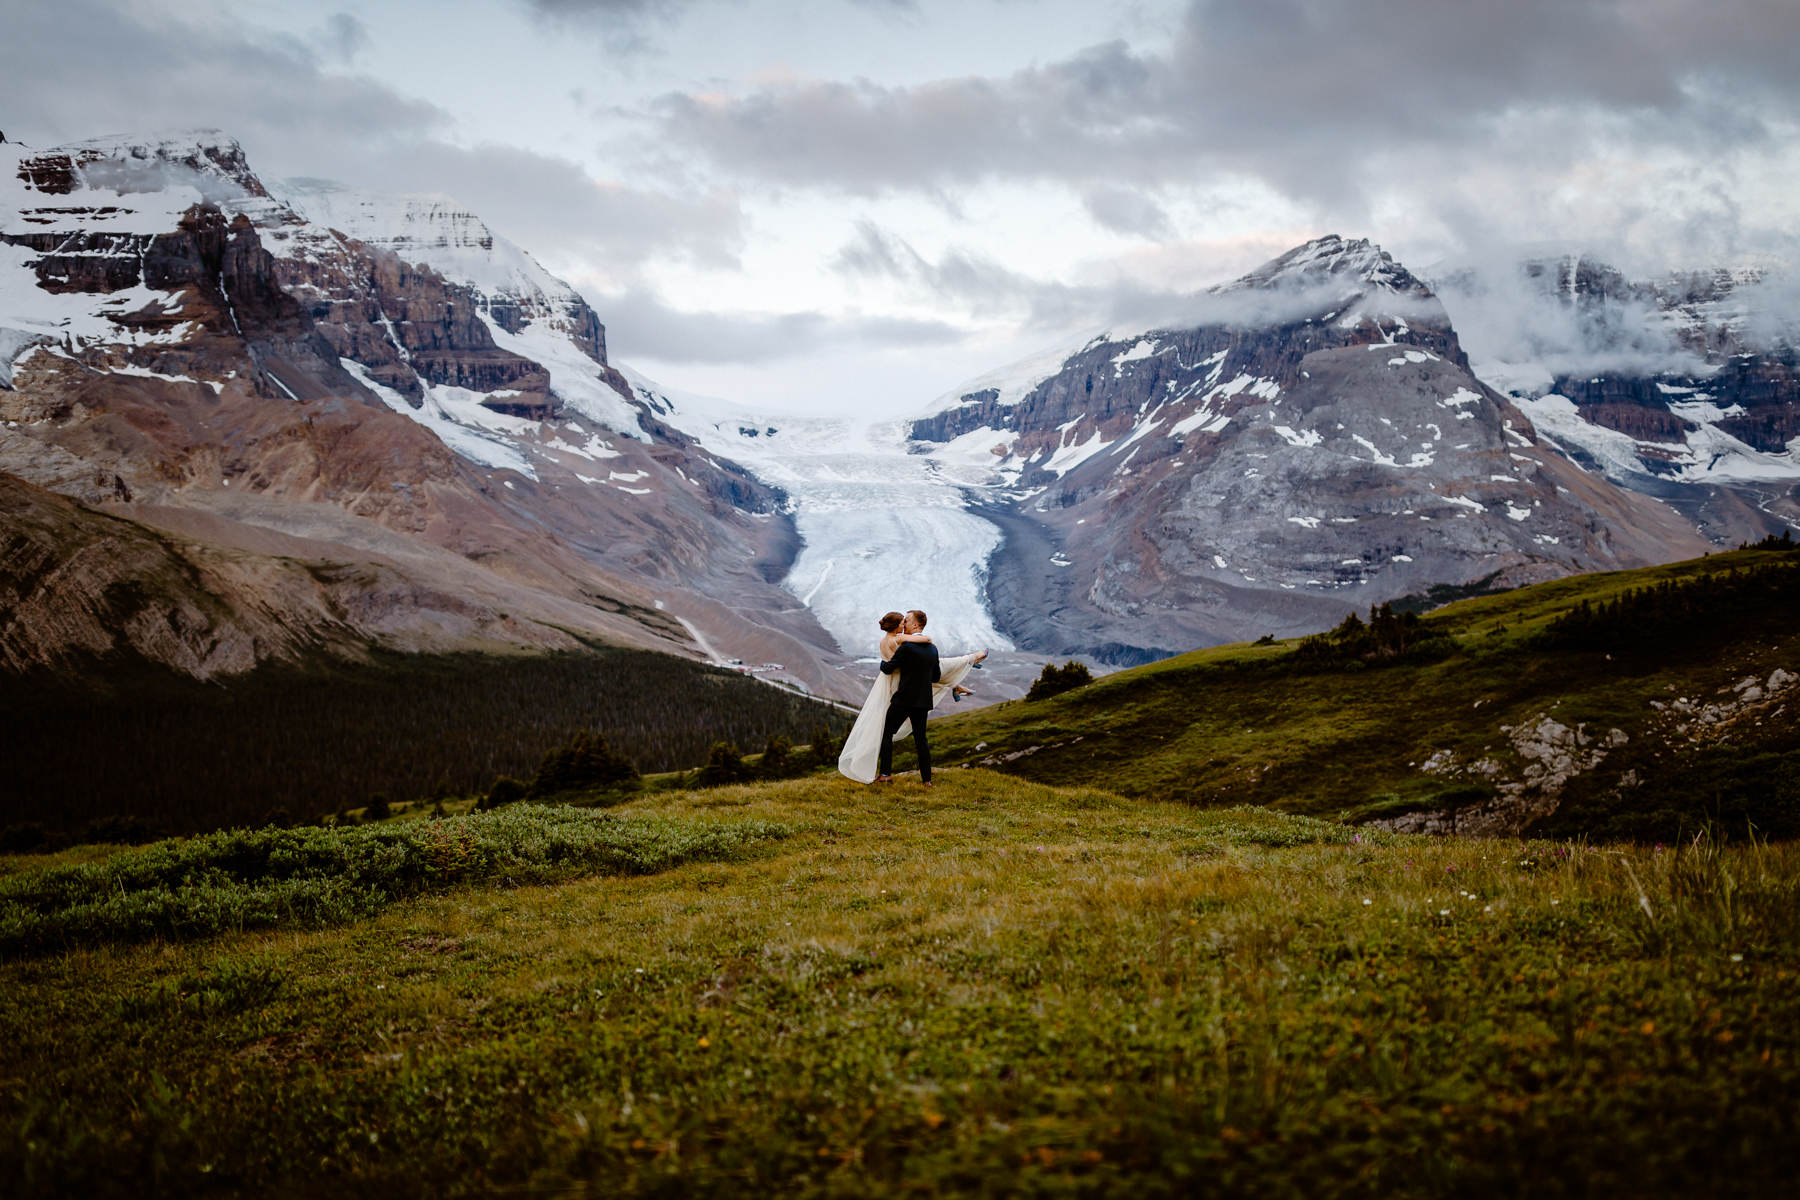 Hiking Elopement Photographers in Banff National Park - Photo 19